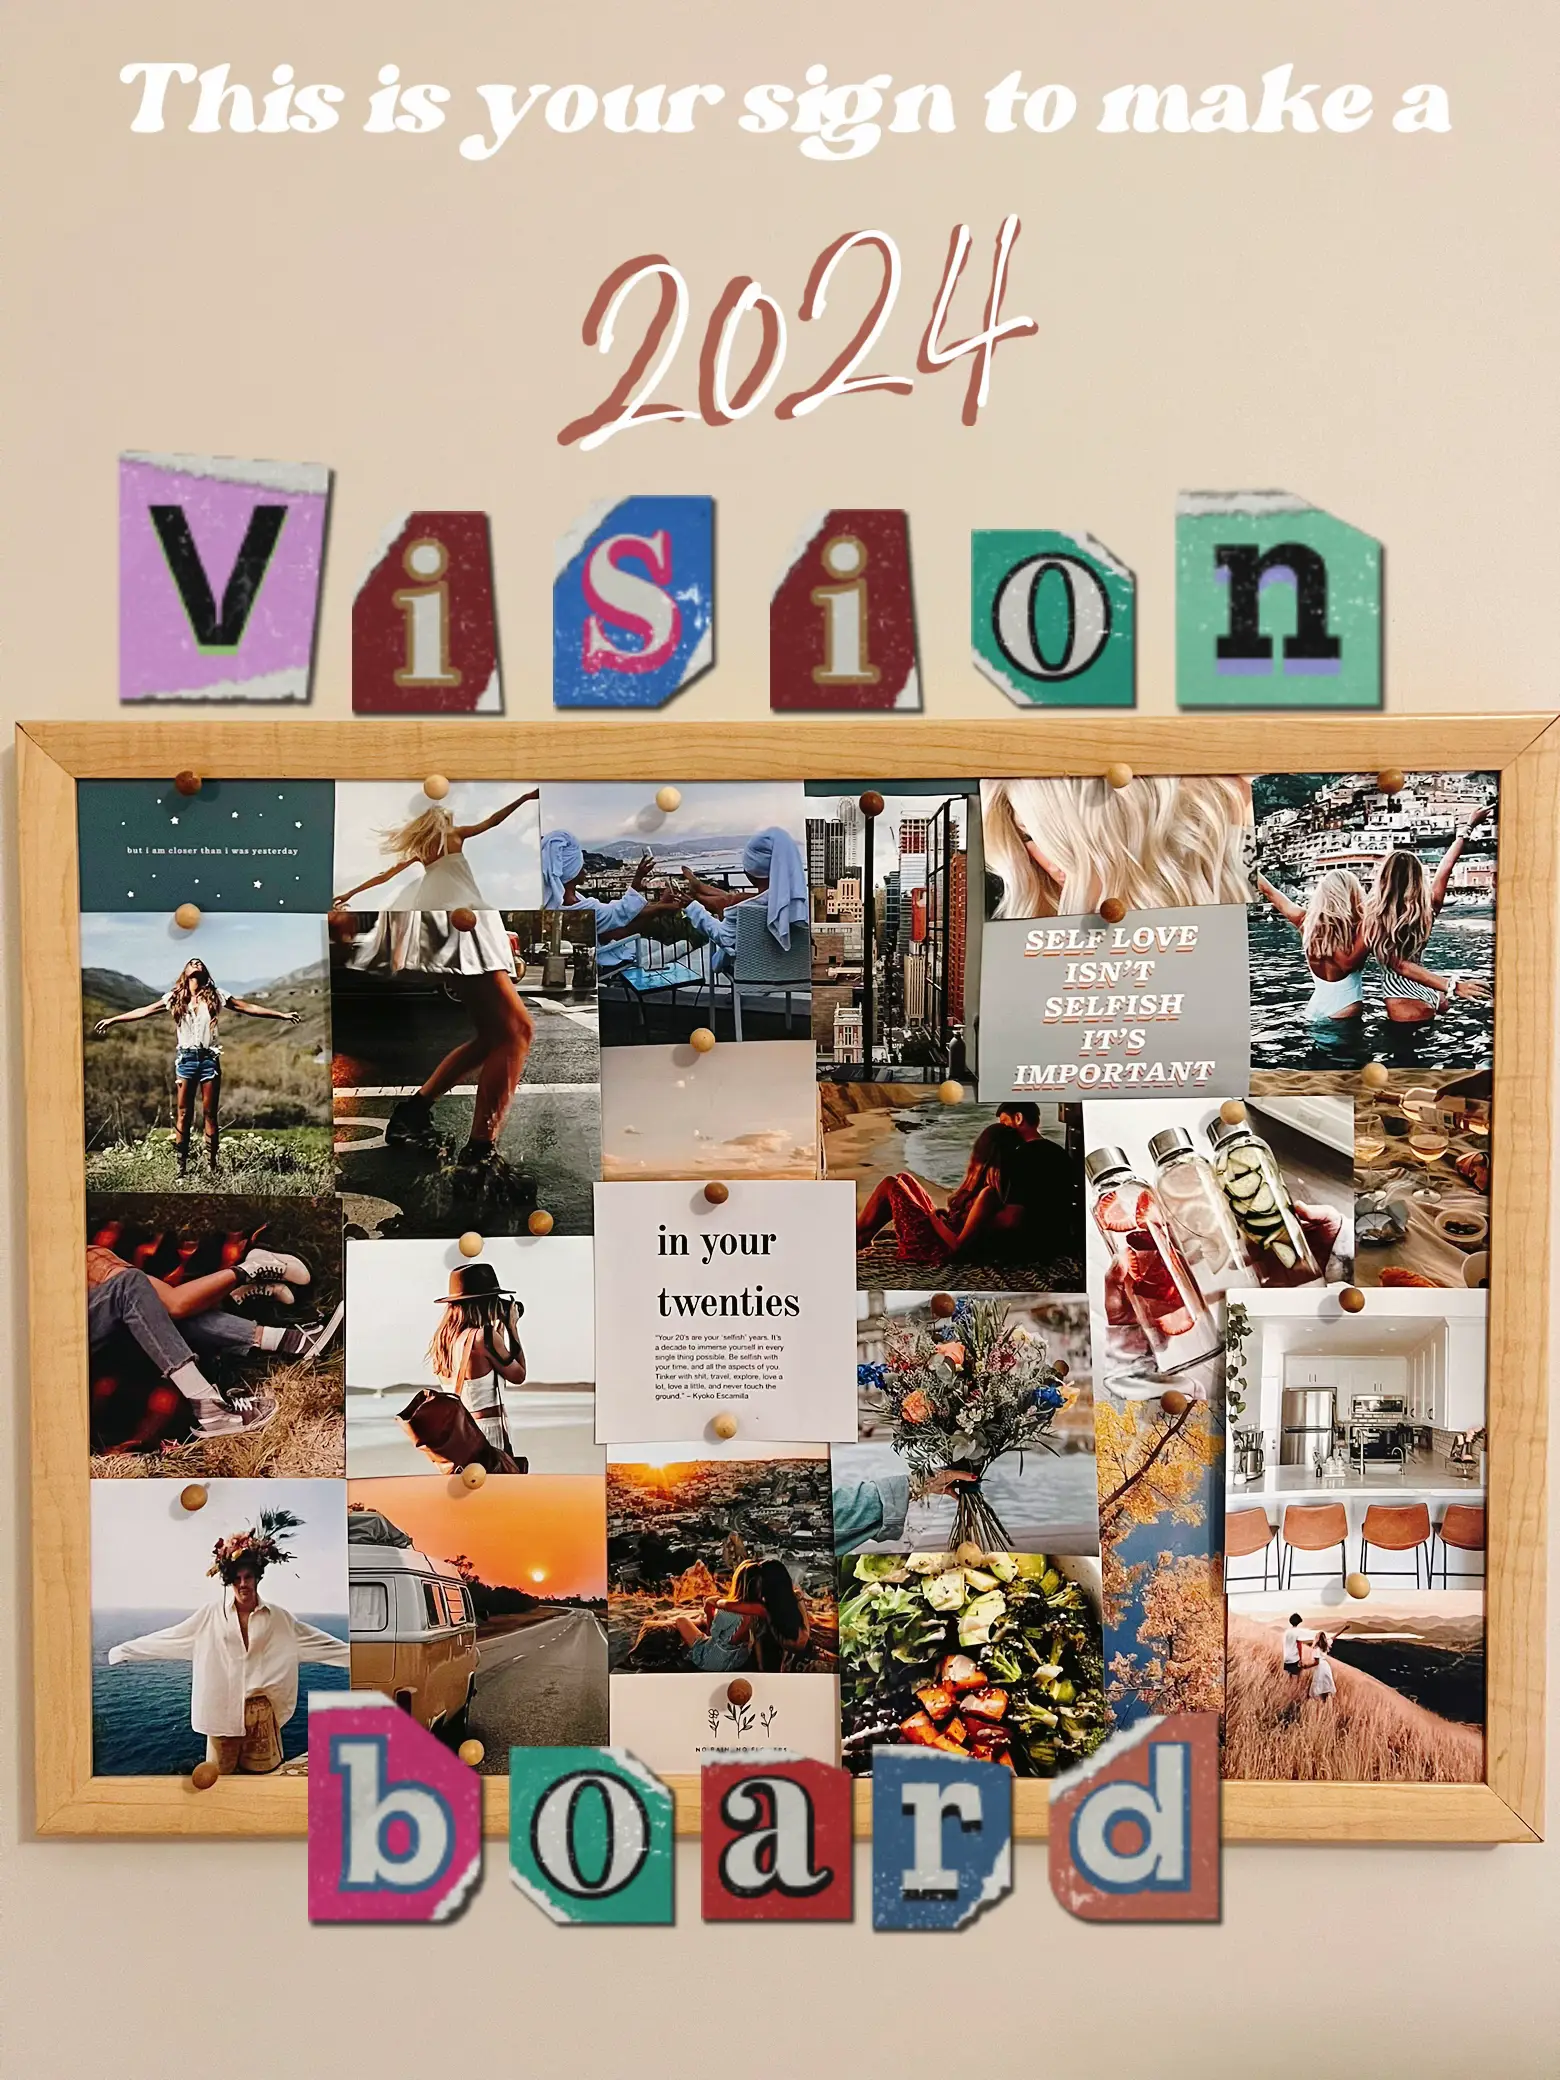 Create Your 2024 Vision Board!, Events